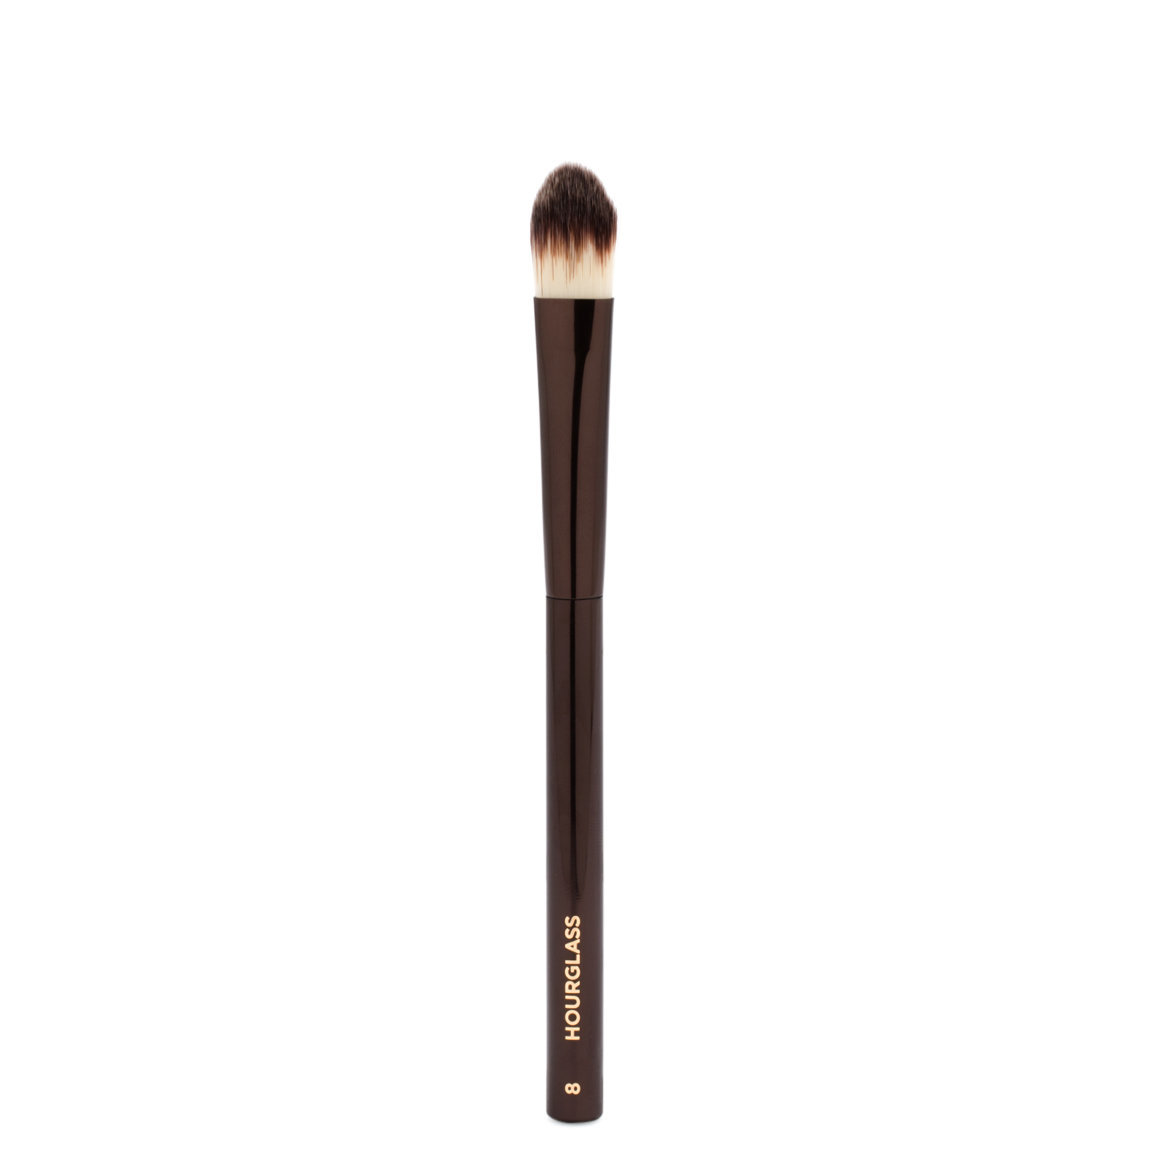 Hourglass N° 8 Large Concealer Brush alternative view 1 - product swatch.